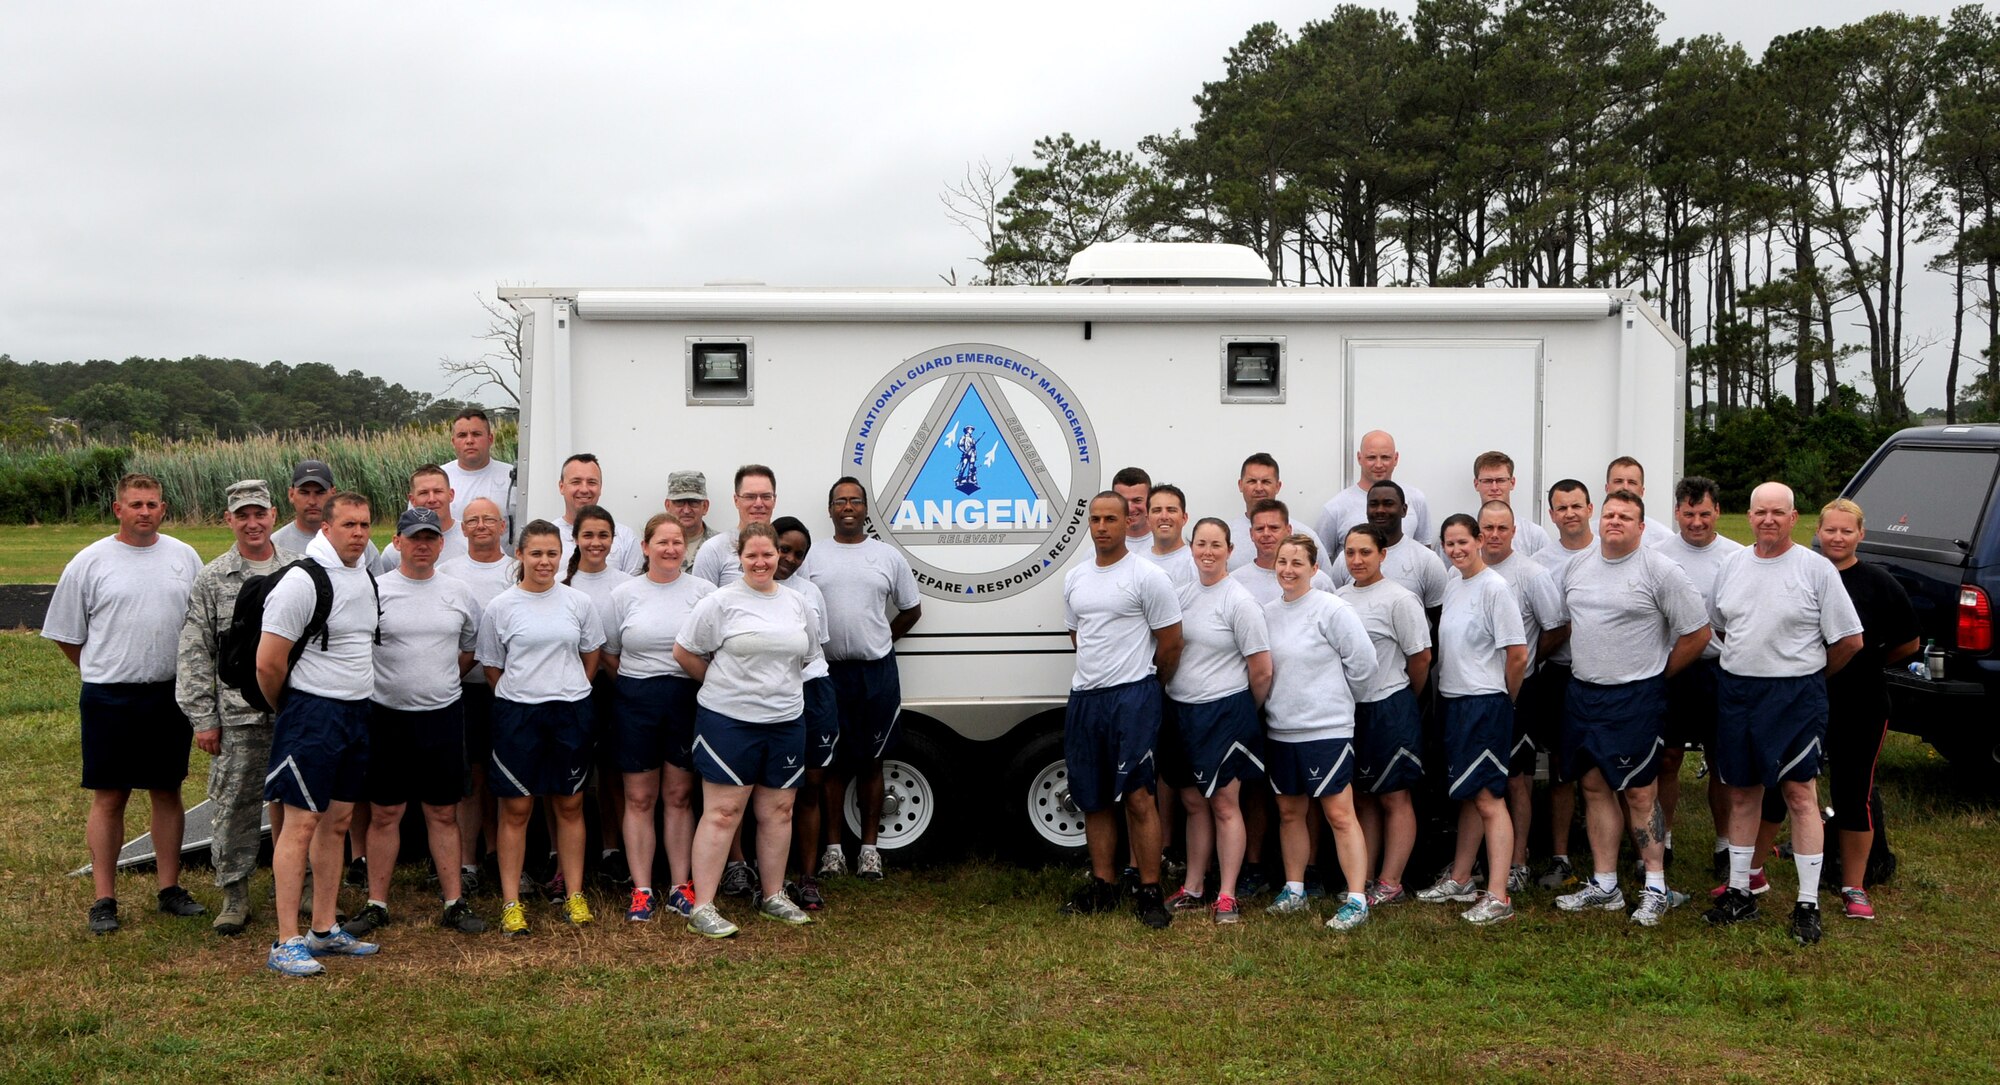 Emergency Management specialists pose for a photo after the Region 3 Management Training exercise at the Bethany Beach Regional Training Institute, Delaware Air National Guard June 27, 2014. More than 40 emergency managers comprised from the District of Columbia, Delaware, Maryland, and Pennsylvania Air National Guard participated in the inaugural Region 3 training exercise. (Air National Guard photo by Master Sgt. Craig Clapper/released)  